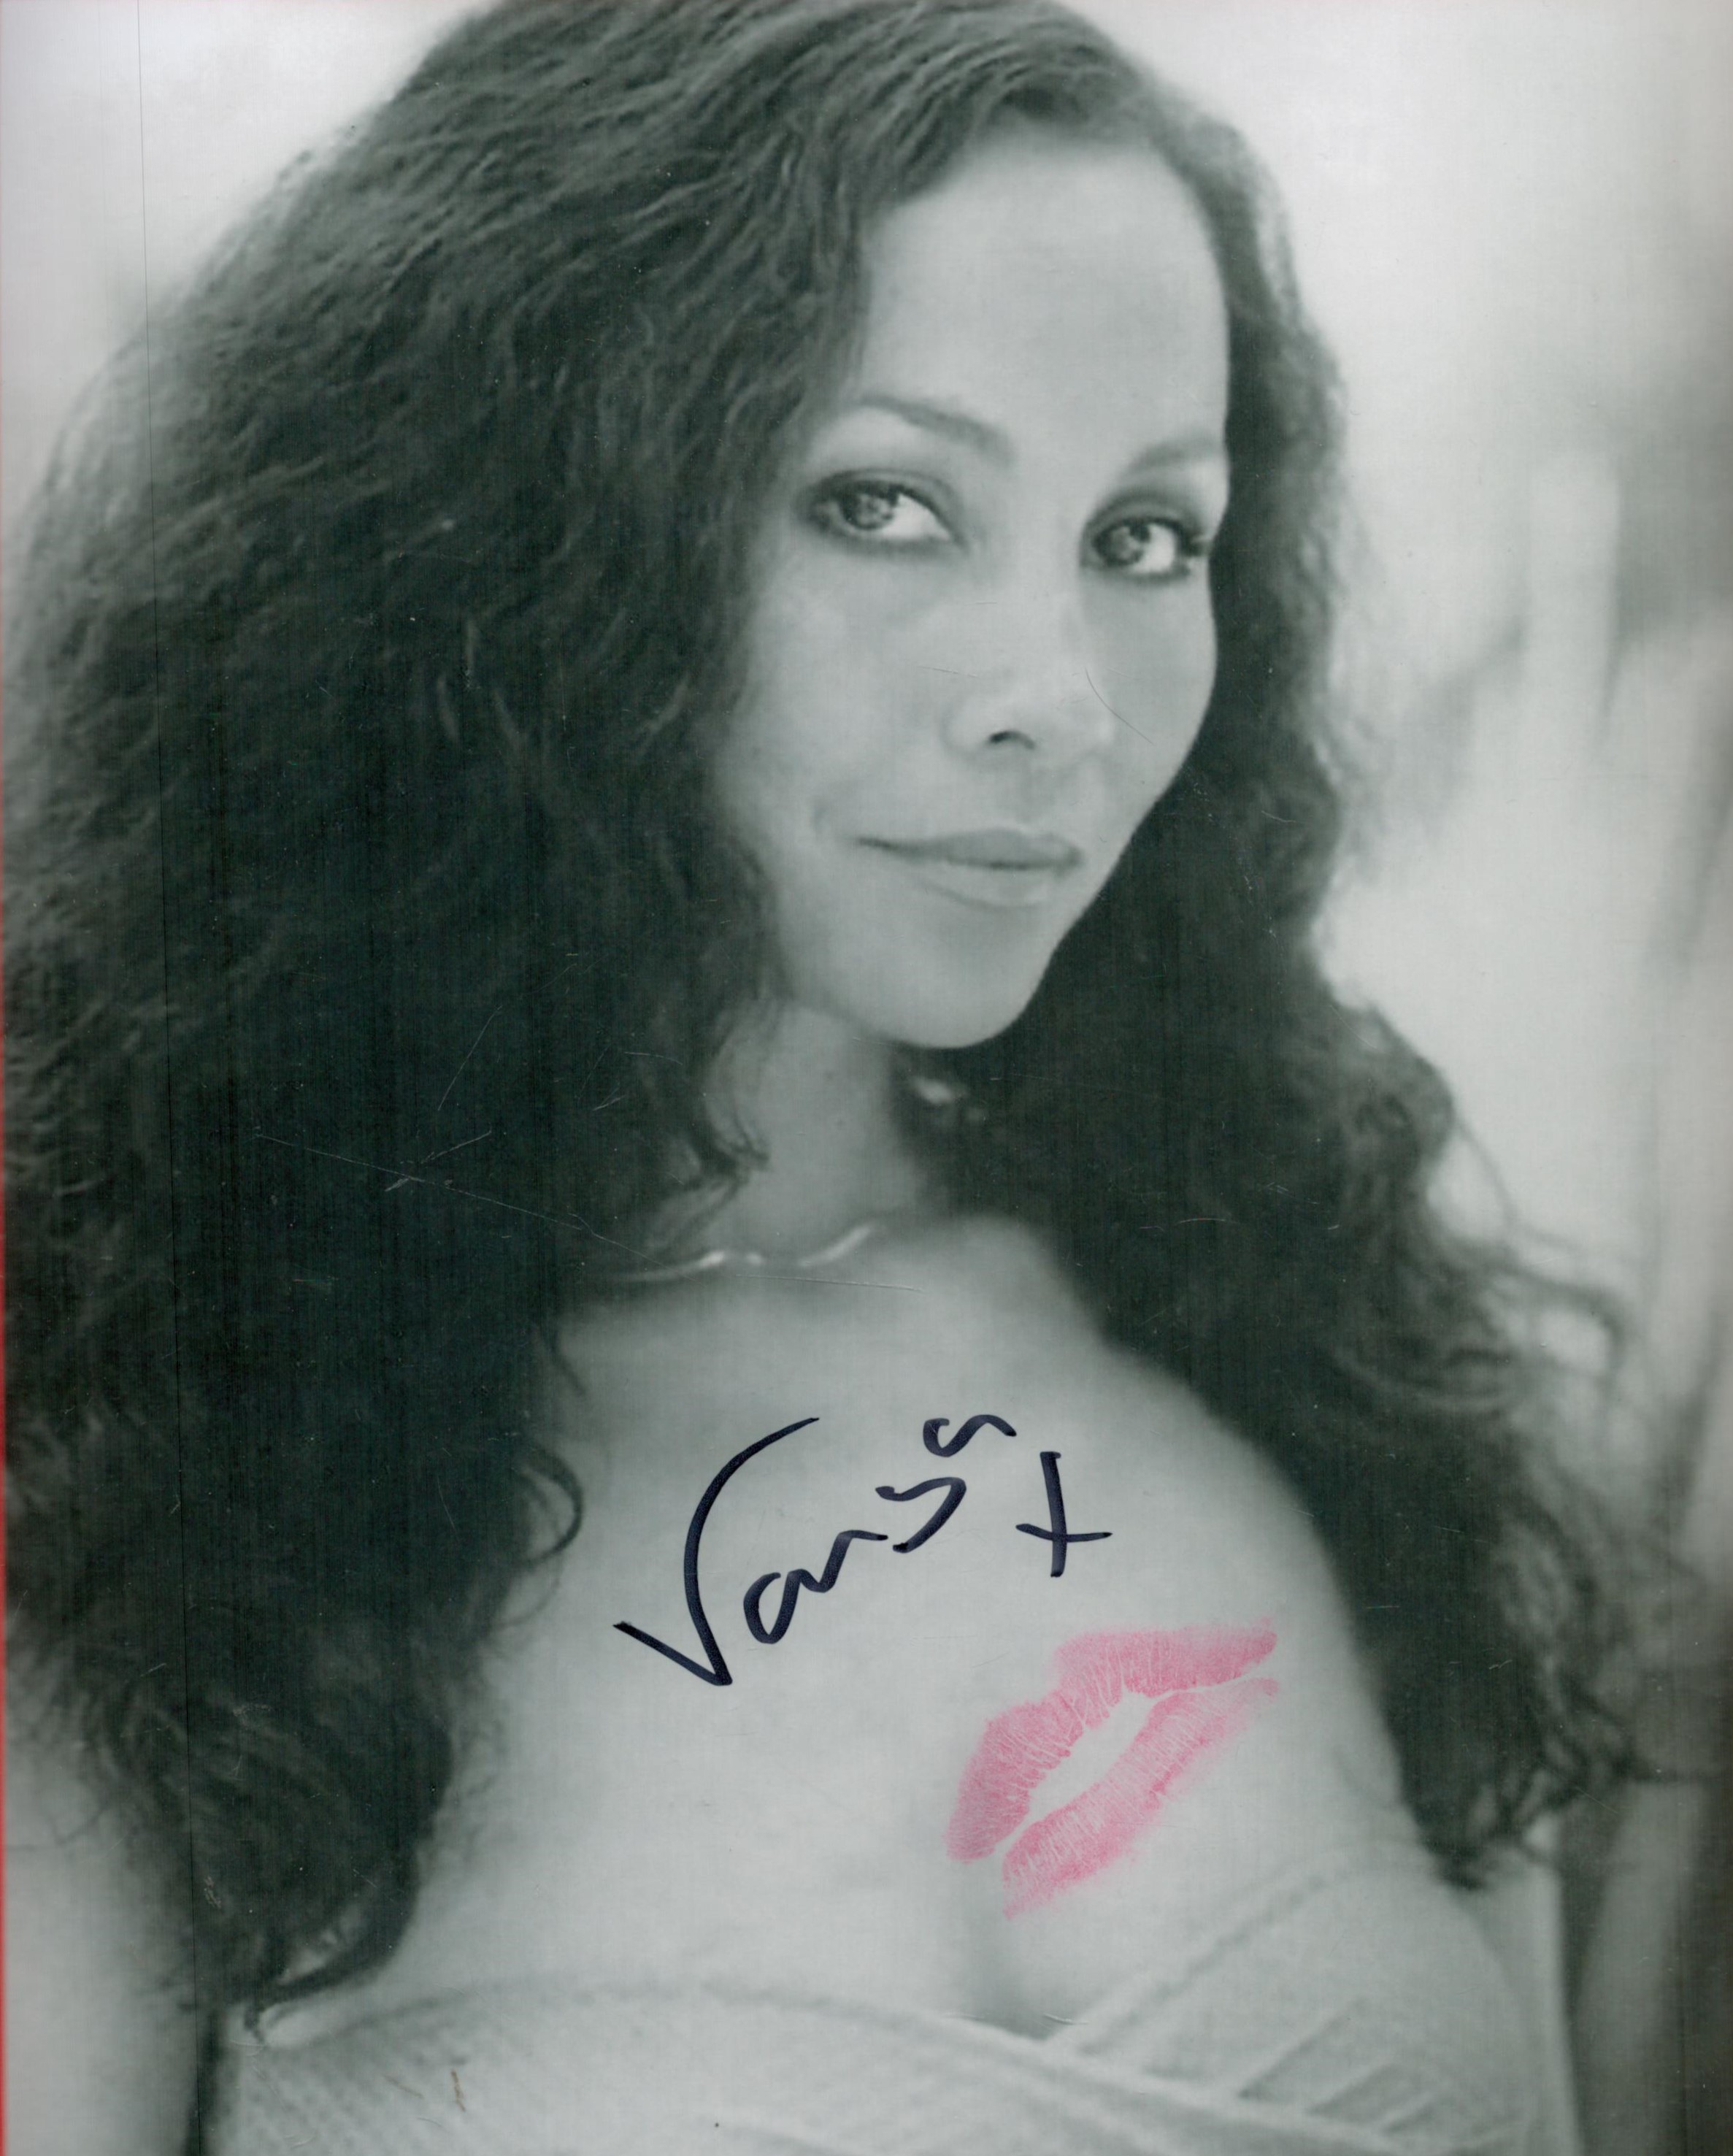 James Bond actress and Model Vanya signed 10 x 8 inch b/w photo, with Pink lipstick kiss added. Good